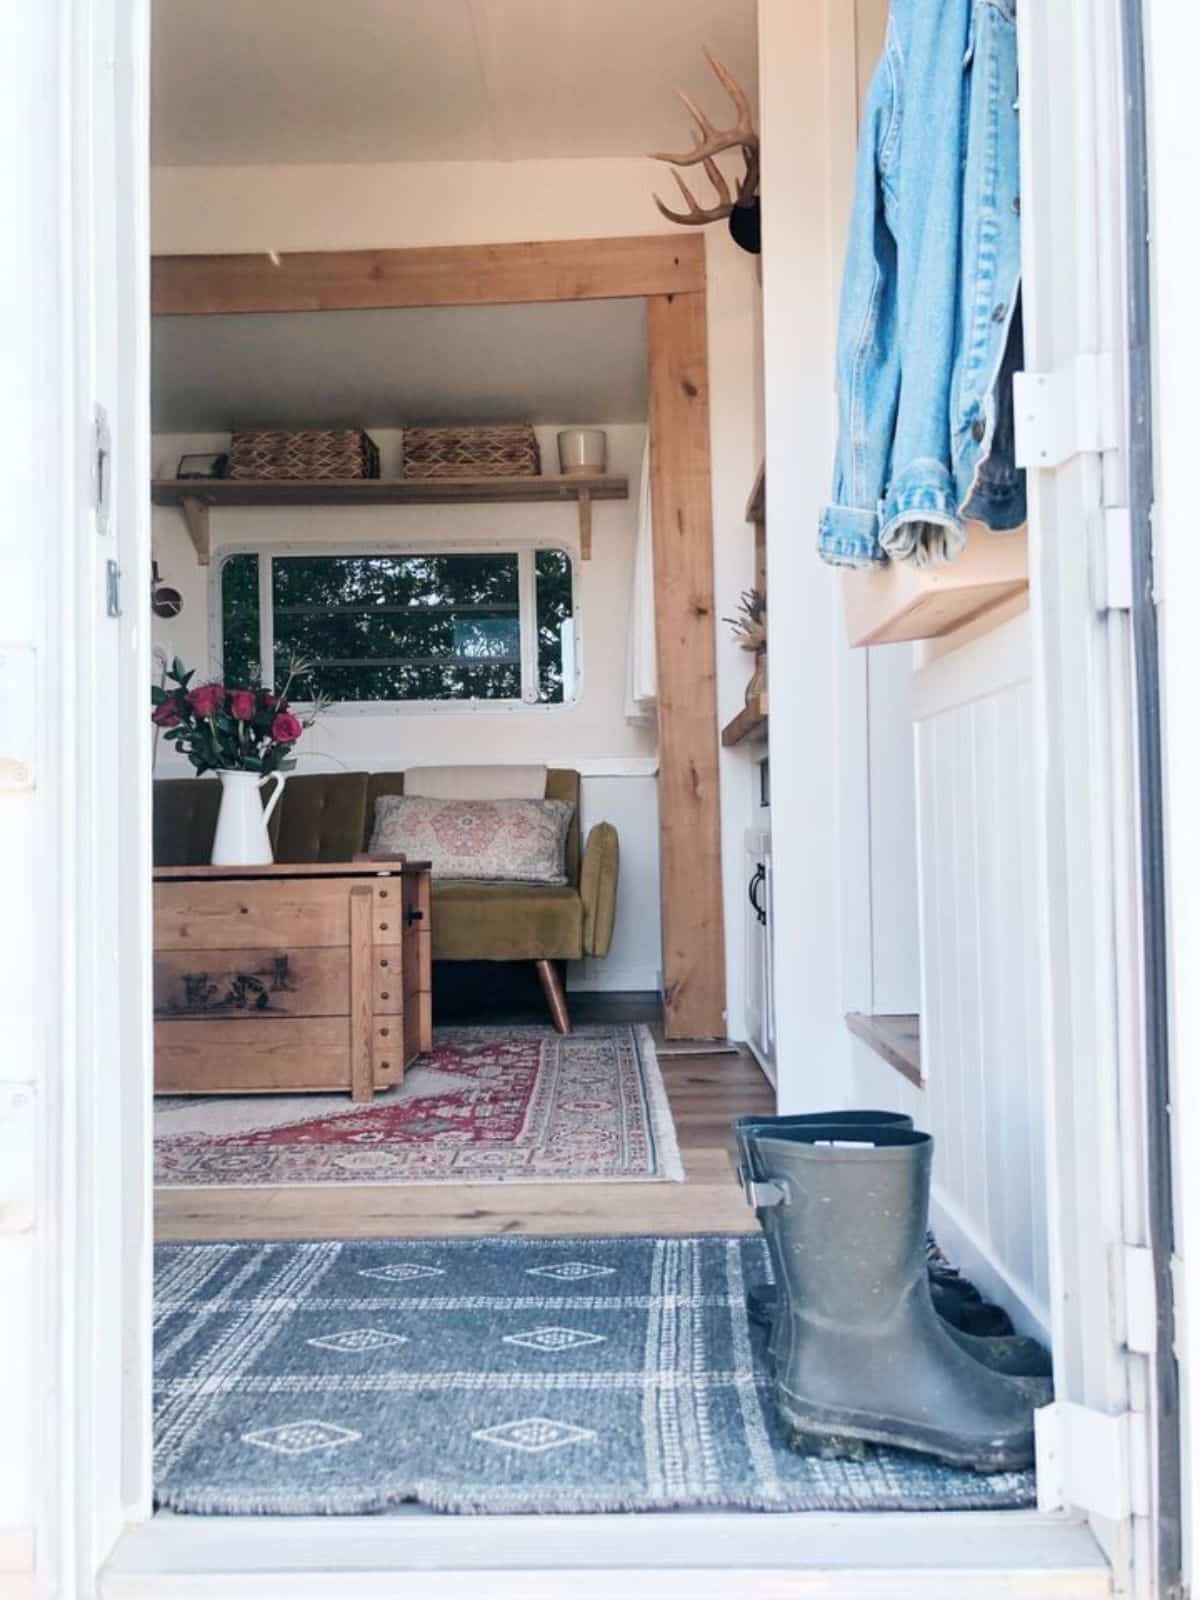 main entrance door view of tiny camper home